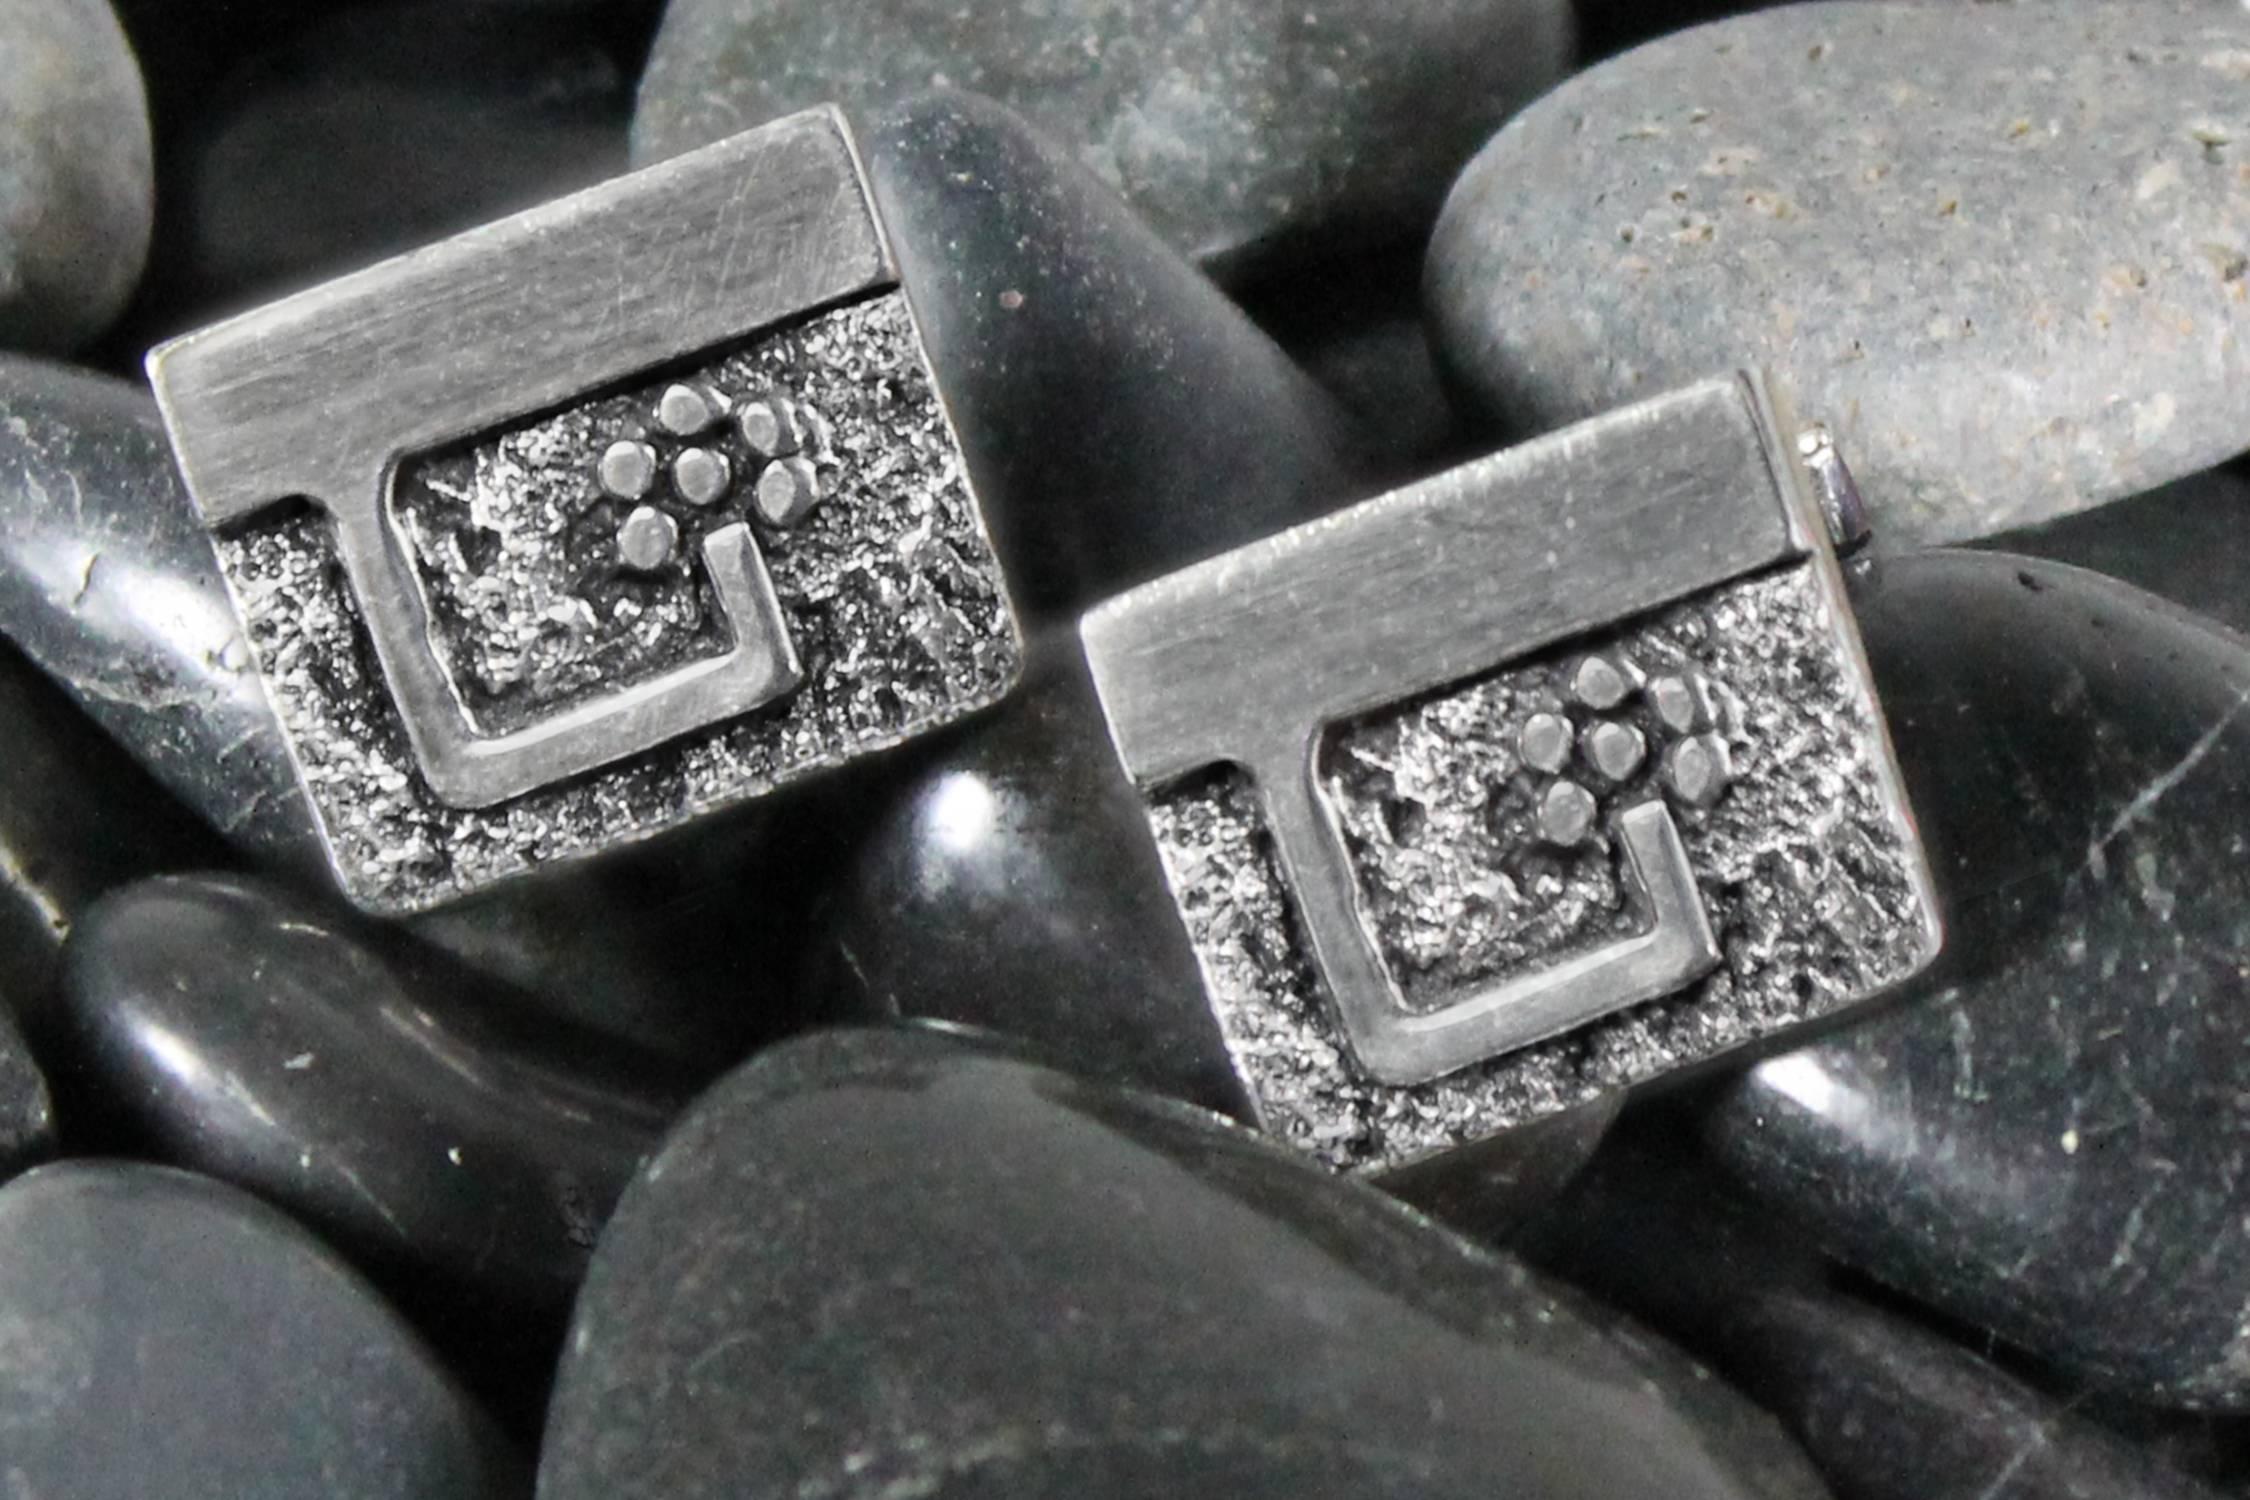 Handsome pair of circa 1970 Guy Gilles Vidal cufflinks, Brutalist style in silver plated pewter. Signed and in good vintage condition.

What a handsome pair of cufflinks by Canadian Montreal-based jewelry maker Guy Gilles Vidal. These wonderful